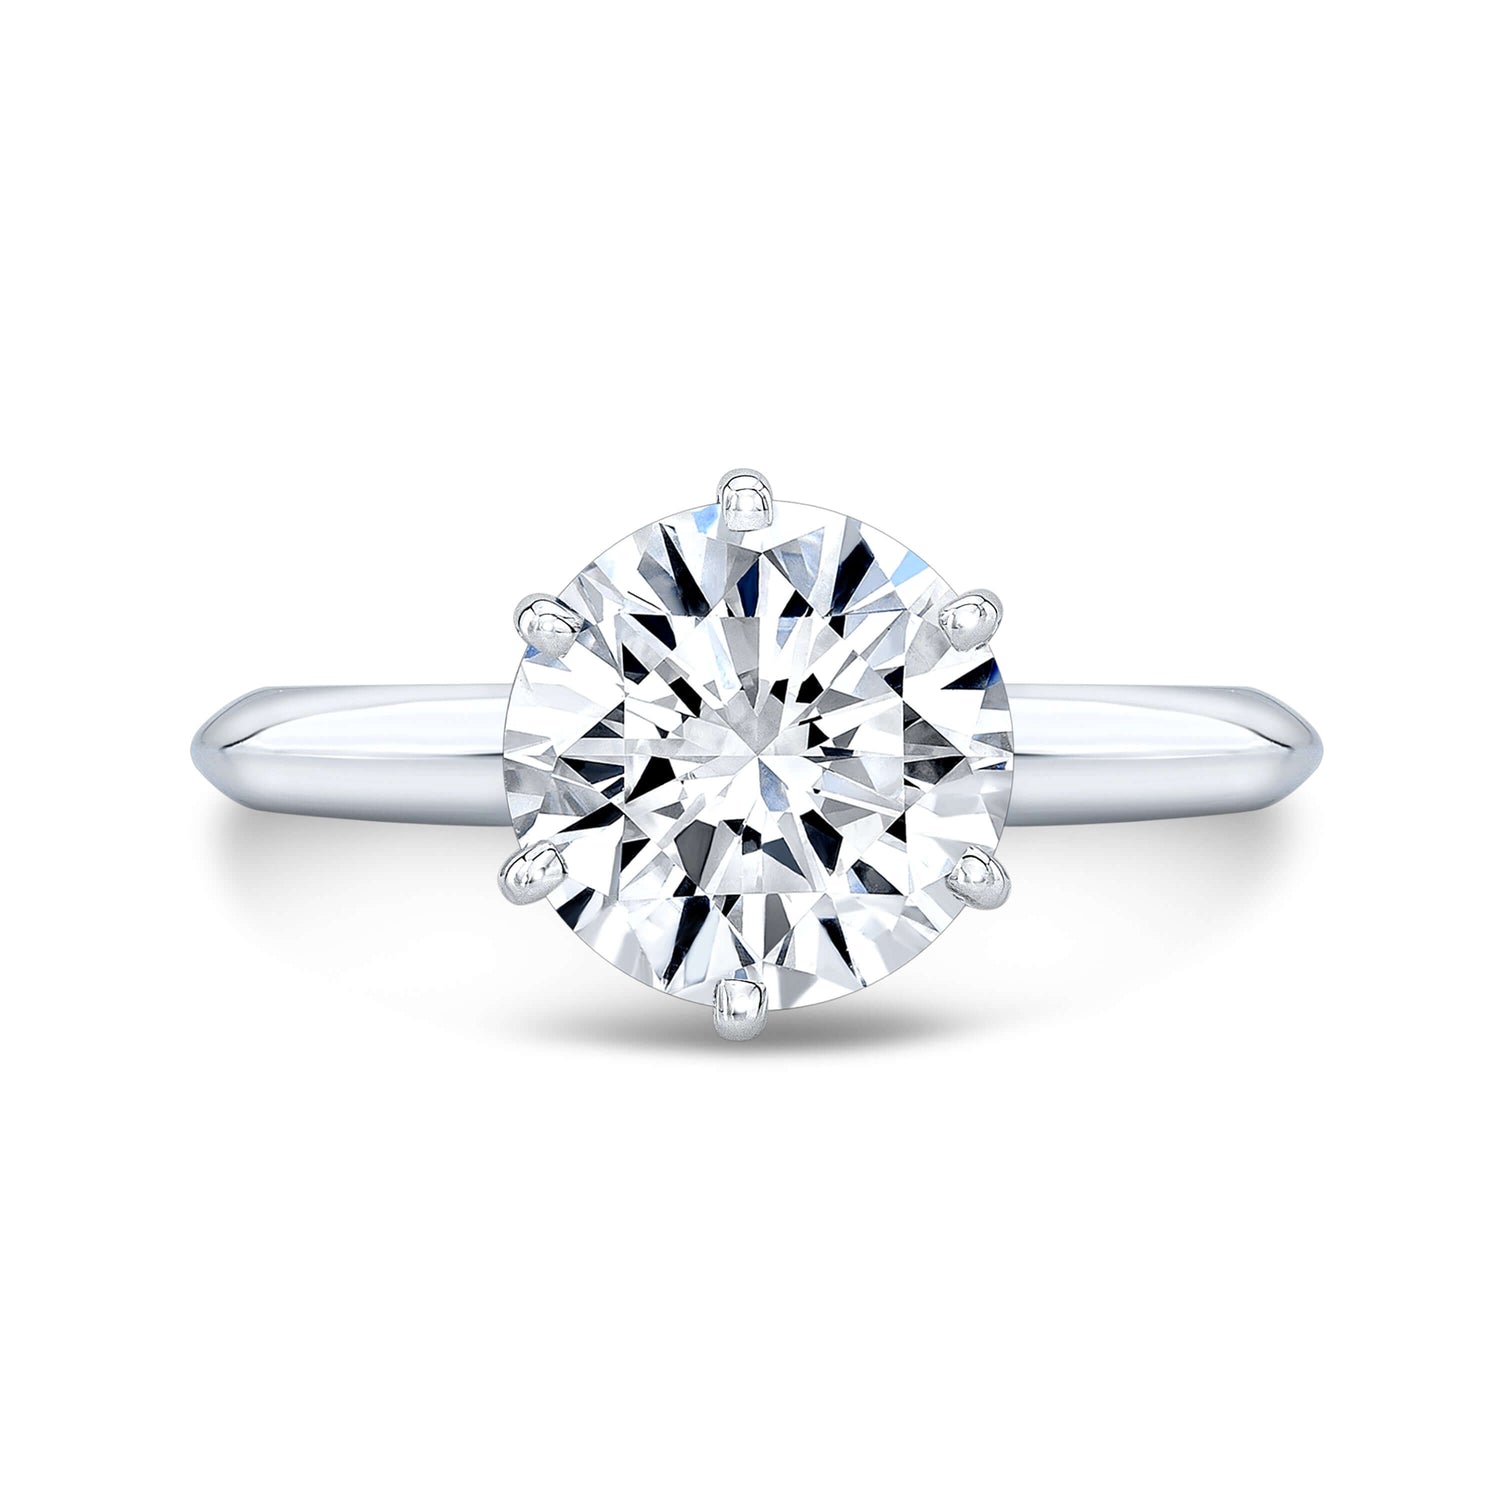 Engagement Rings Collection: A Symphony of Timeless Love